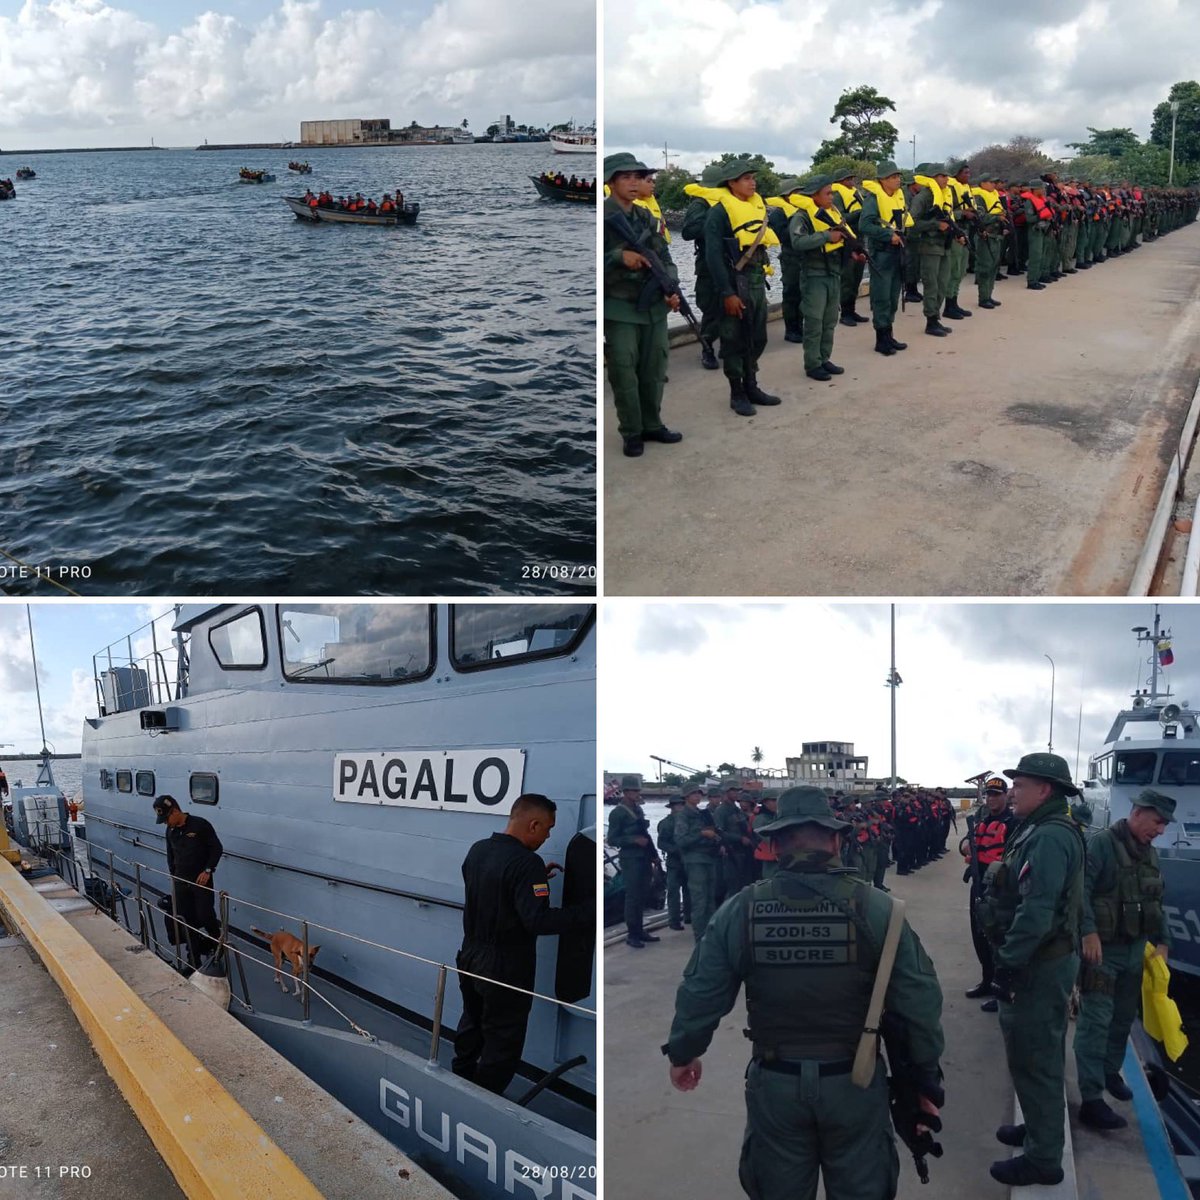 FANB deployed on the coast of Sucre state, guaranteeing social Peace in the fight against organized crime and drug trafficking